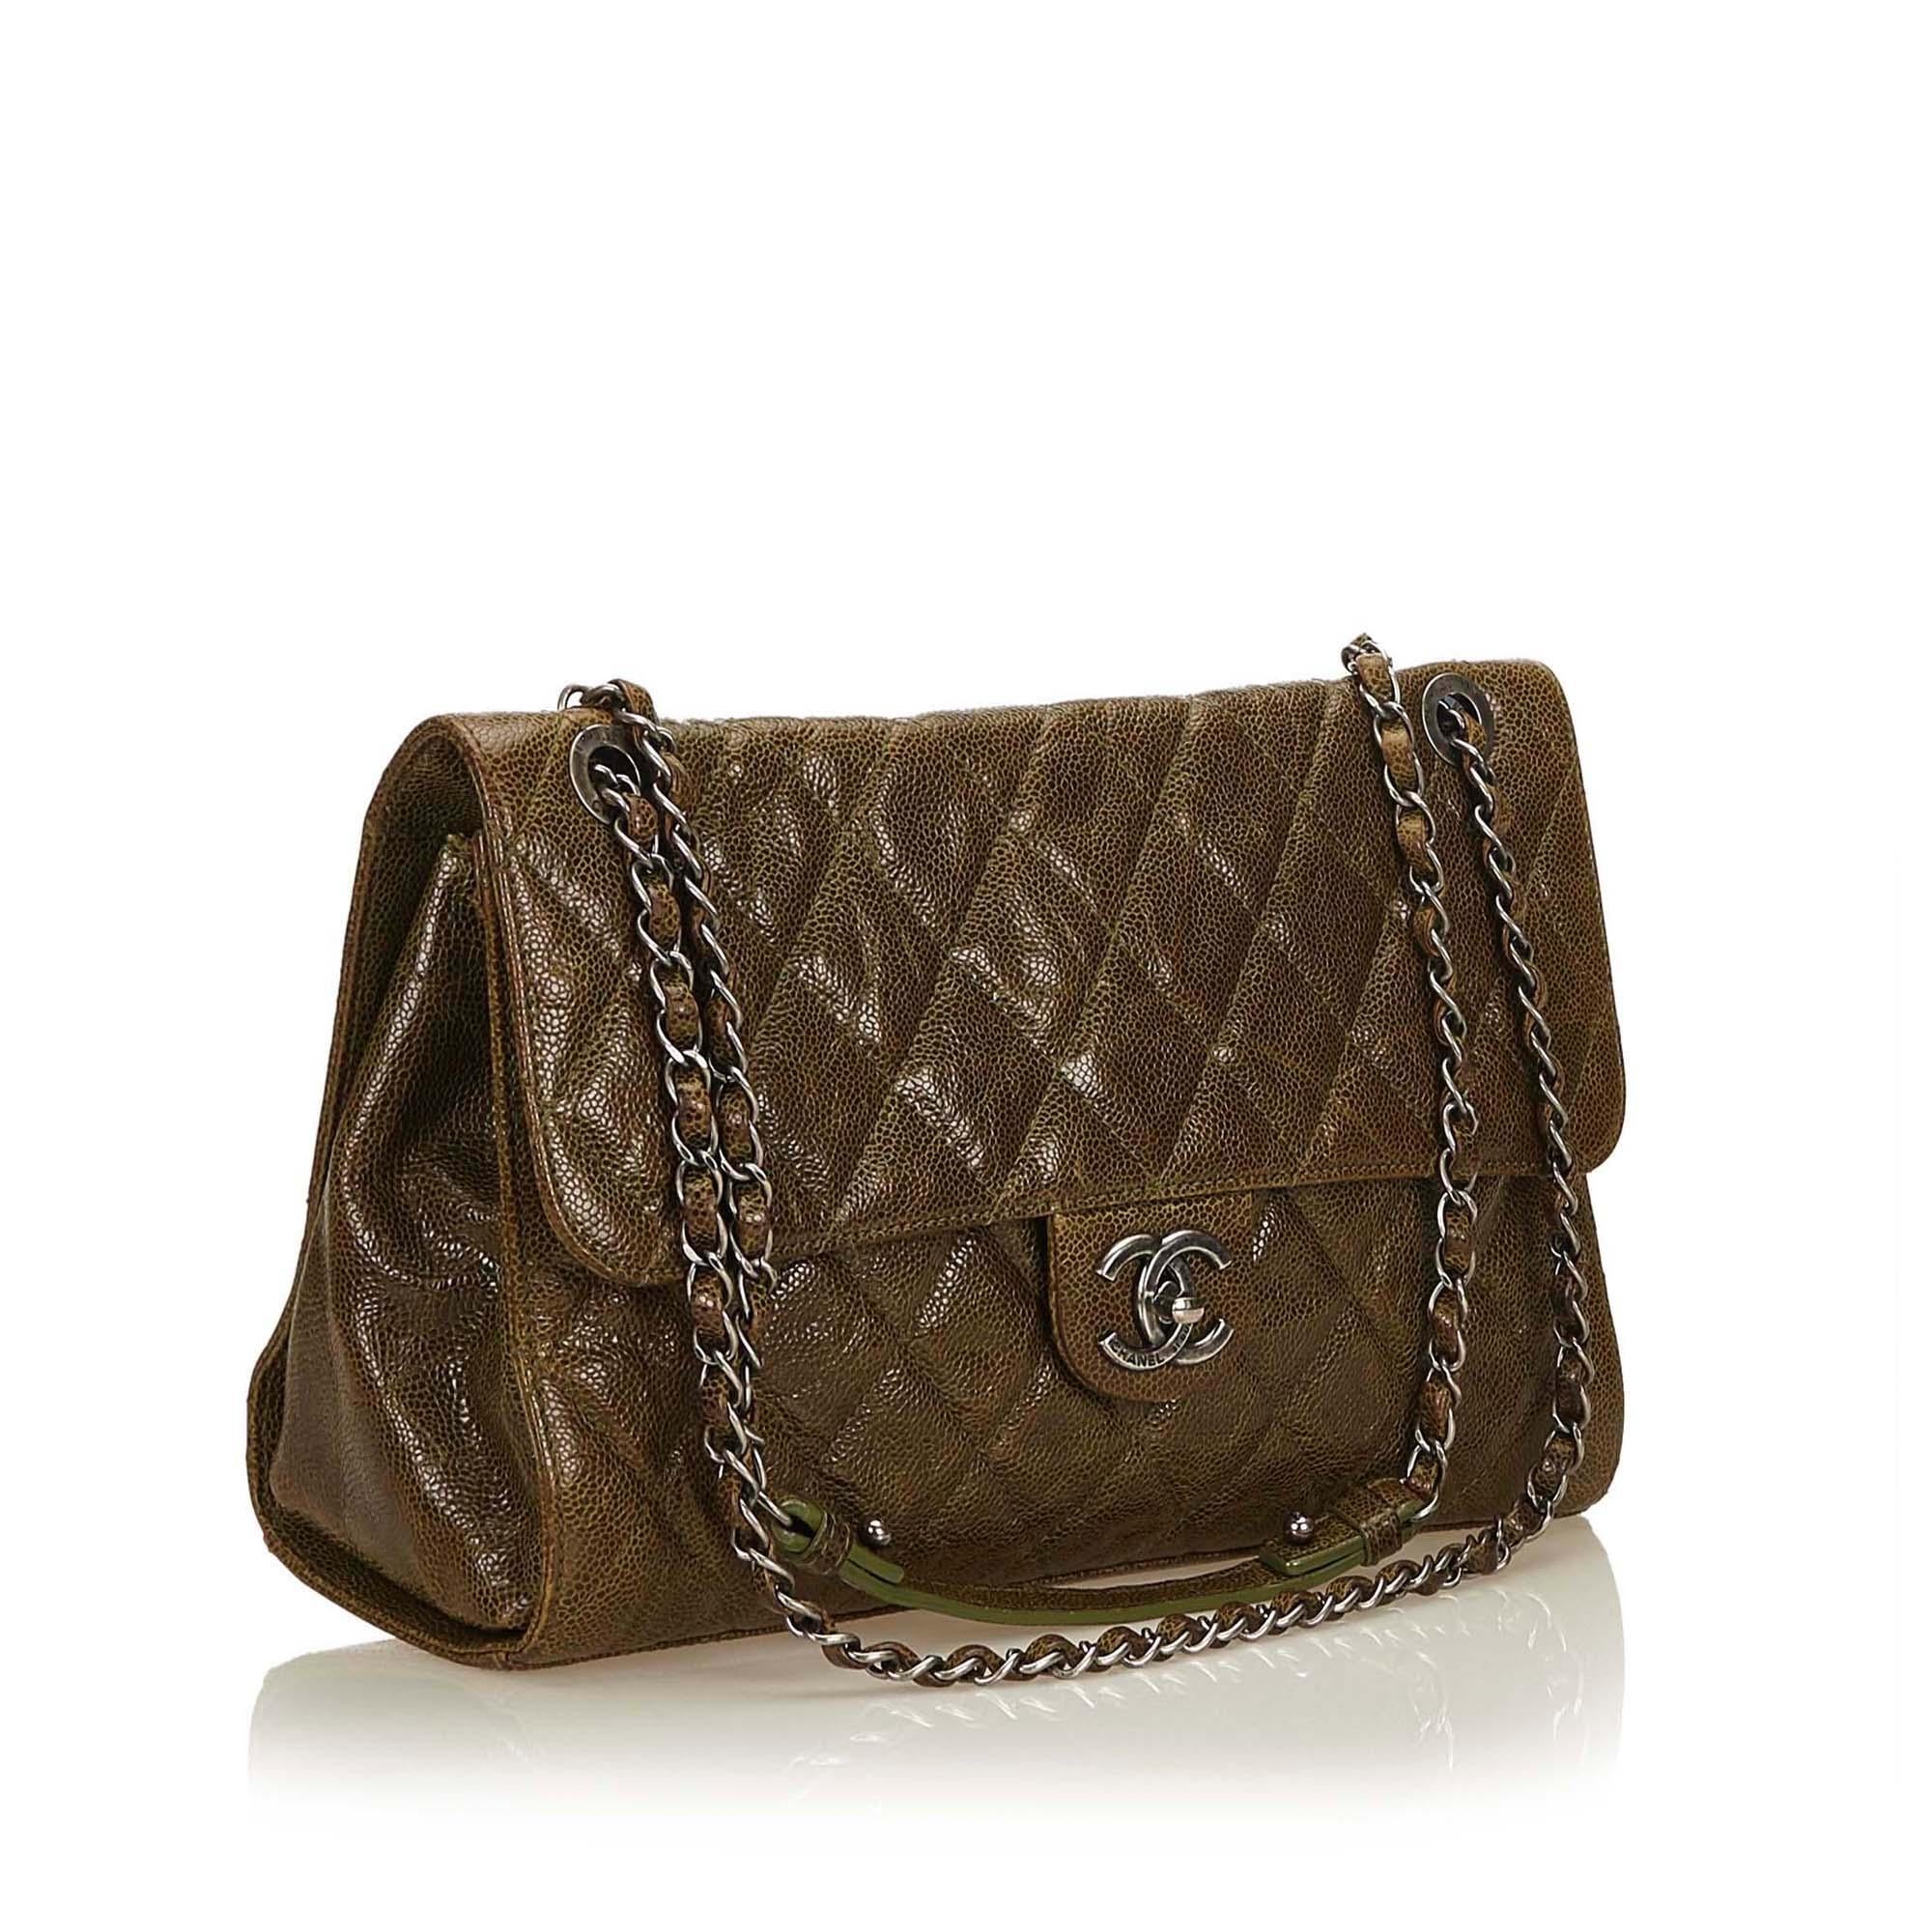 The Jumbo Caviar Flap features a caviar leather body, chain straps, top flap with the interlocking CC twist lock closure, an exterior back pocket, and interior zip and slip pockets.

It carries a B condition rating.

Dimensions: 
Length 21.00